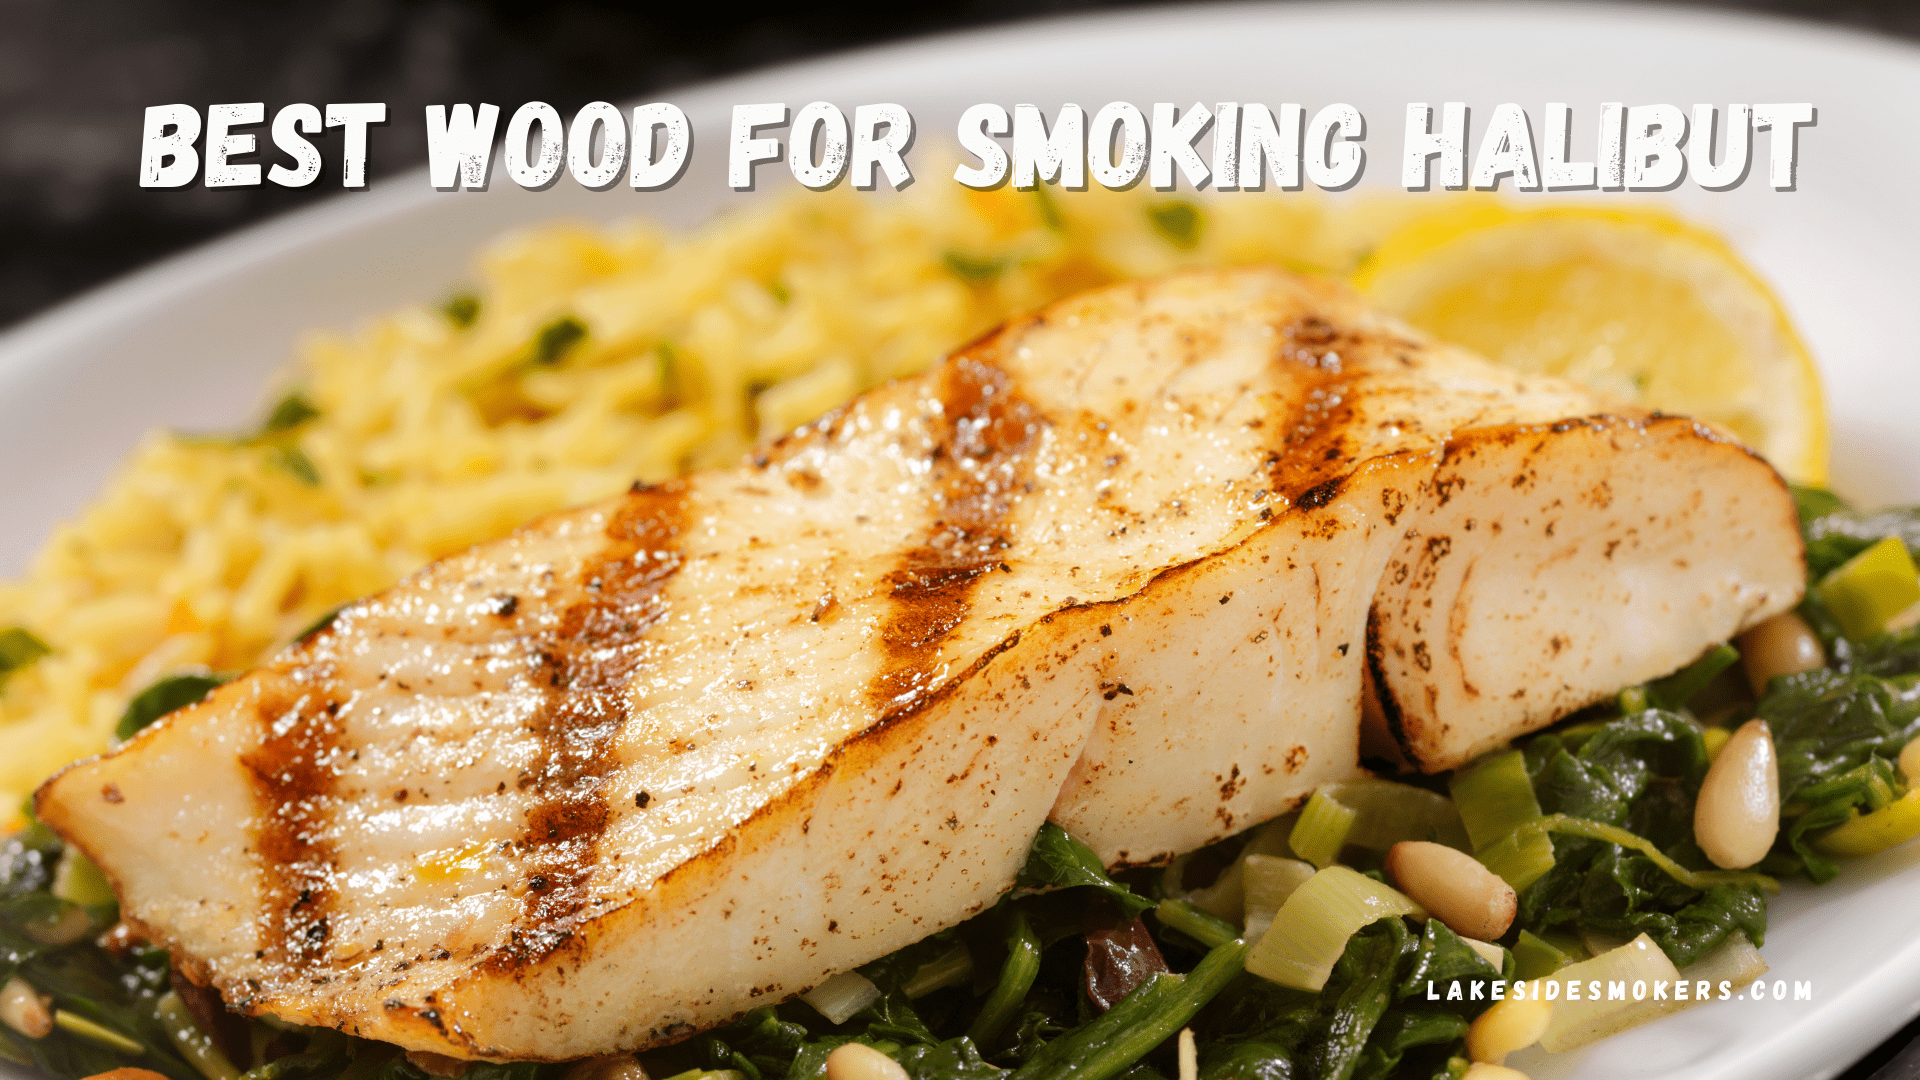 Best wood for smoking halibut | Properly prepare this healthy fish